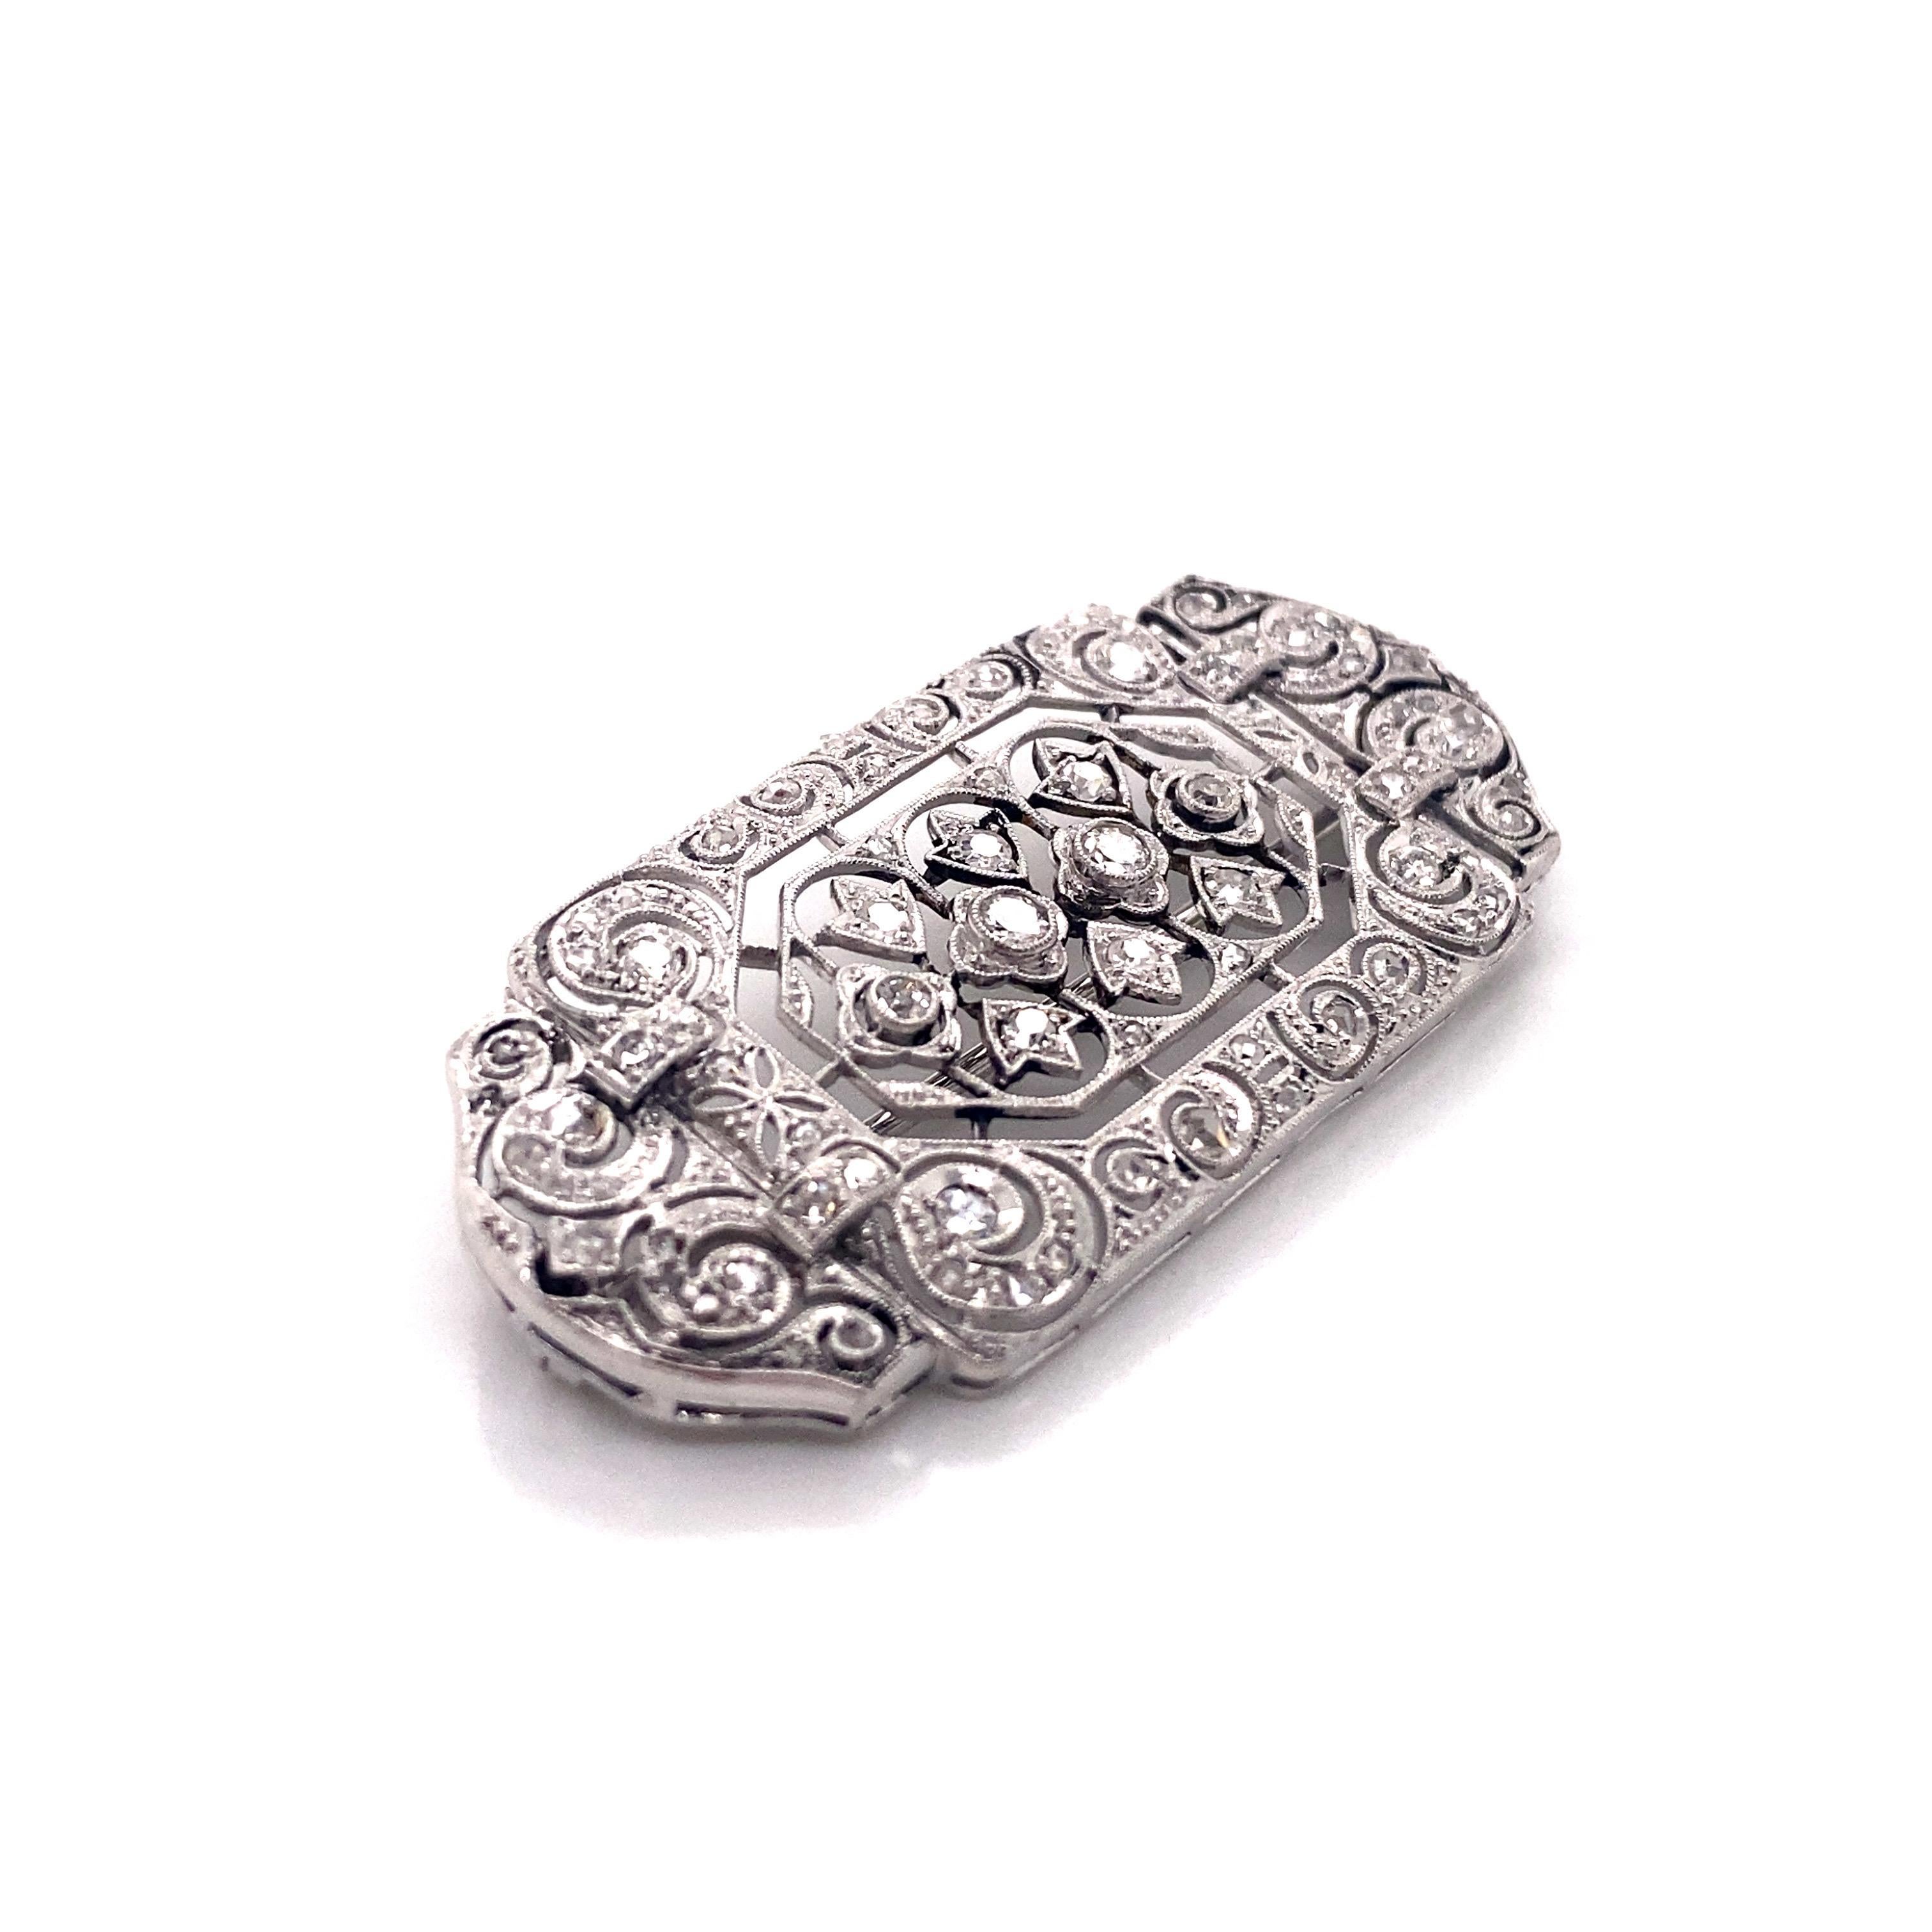 Vintage 1930’s 18K White Gold Art Deco Diamond Brooch - The brooch contains 102 single cut, rose cut and full cut round diamonds that weigh approximately 1ct total weight. The diamond quality is H - I color and VS1 - SI1 clarity. The brooch has very